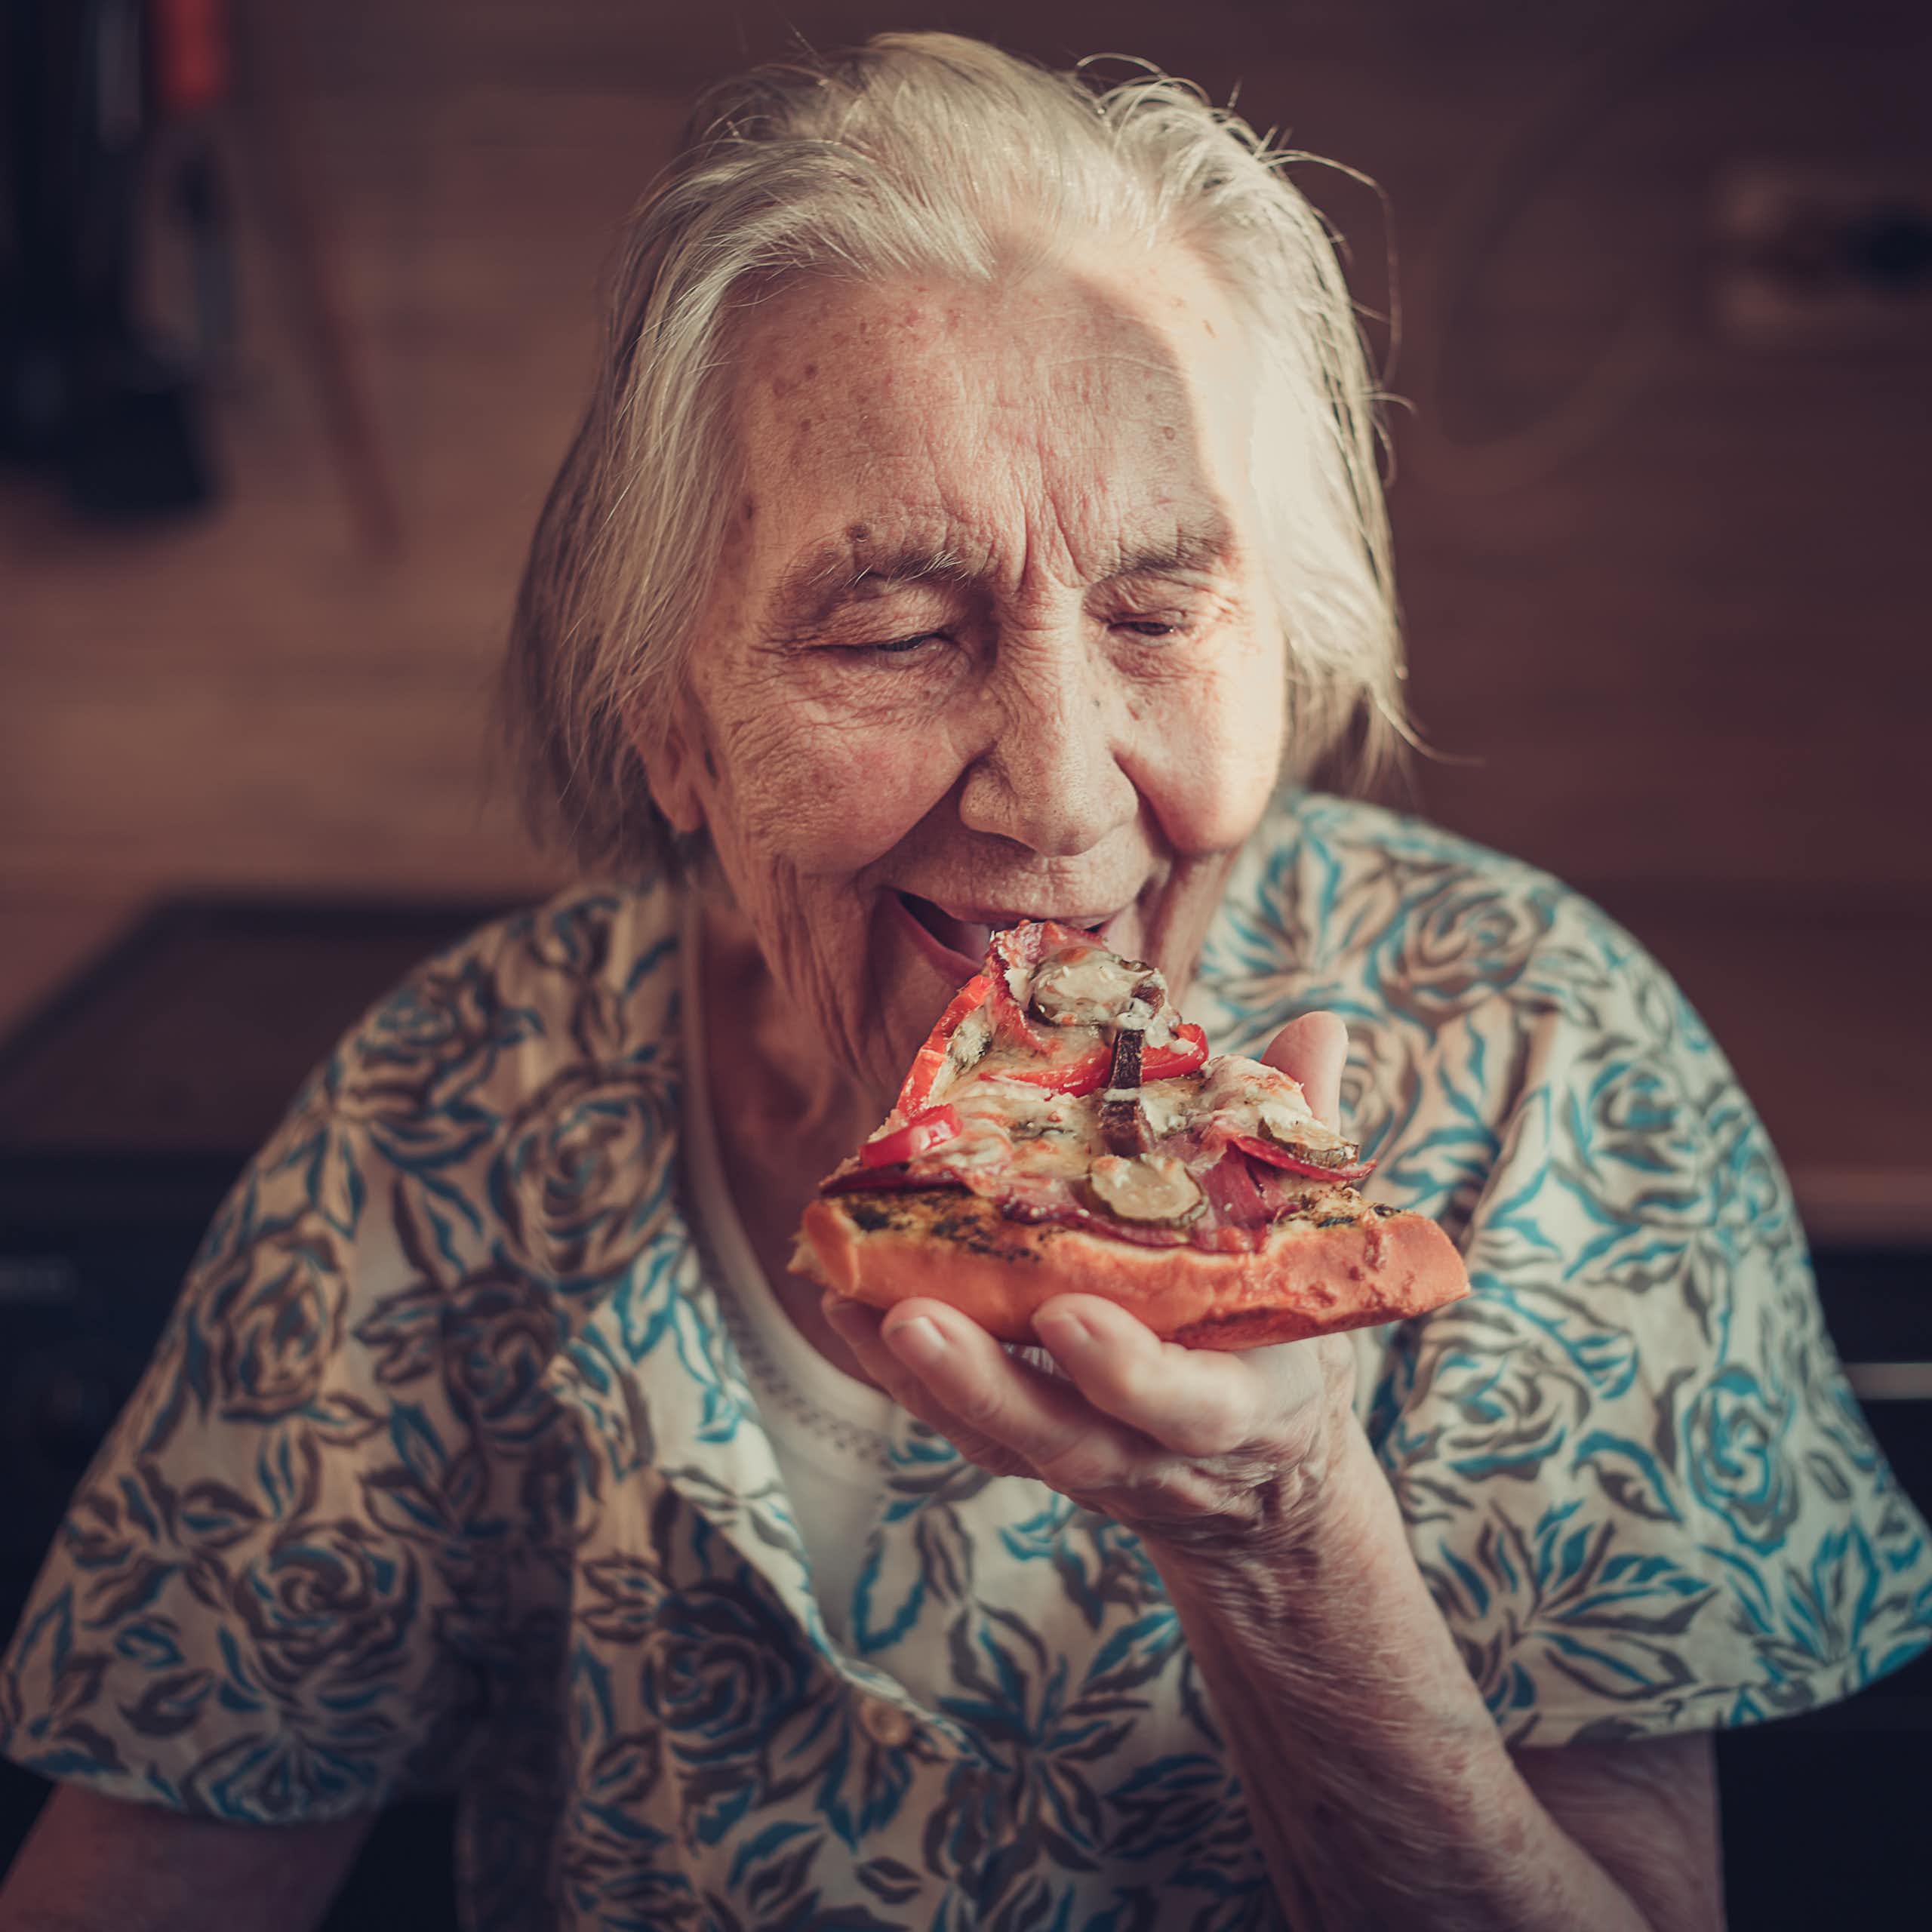 Why you should never take nutrition advice from a centenarian